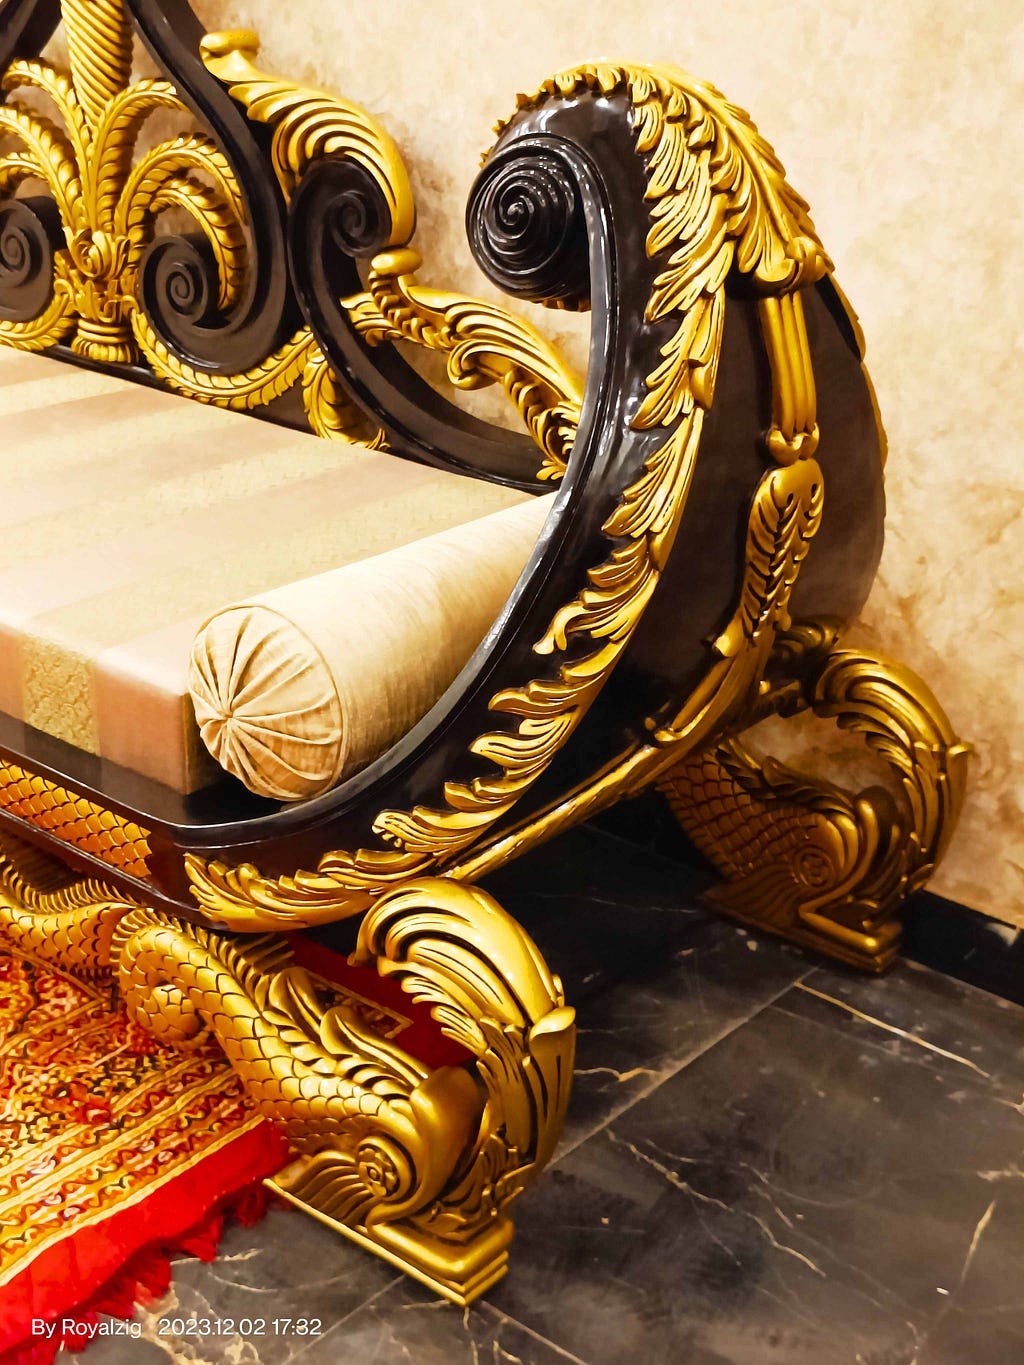 Crafted to Rule with Elegance and Artistry Through Its Royal Design, Premium-Quality Materials, and Mesmerizing Wood Carving, This ‘Maharaja Sofa’ in Teak Wood Carving with Luxurious Jacquard Fabric — Royal Golden Color — Boasts a Majestic Design Handmade in India by Royalzig Luxury Furniture .